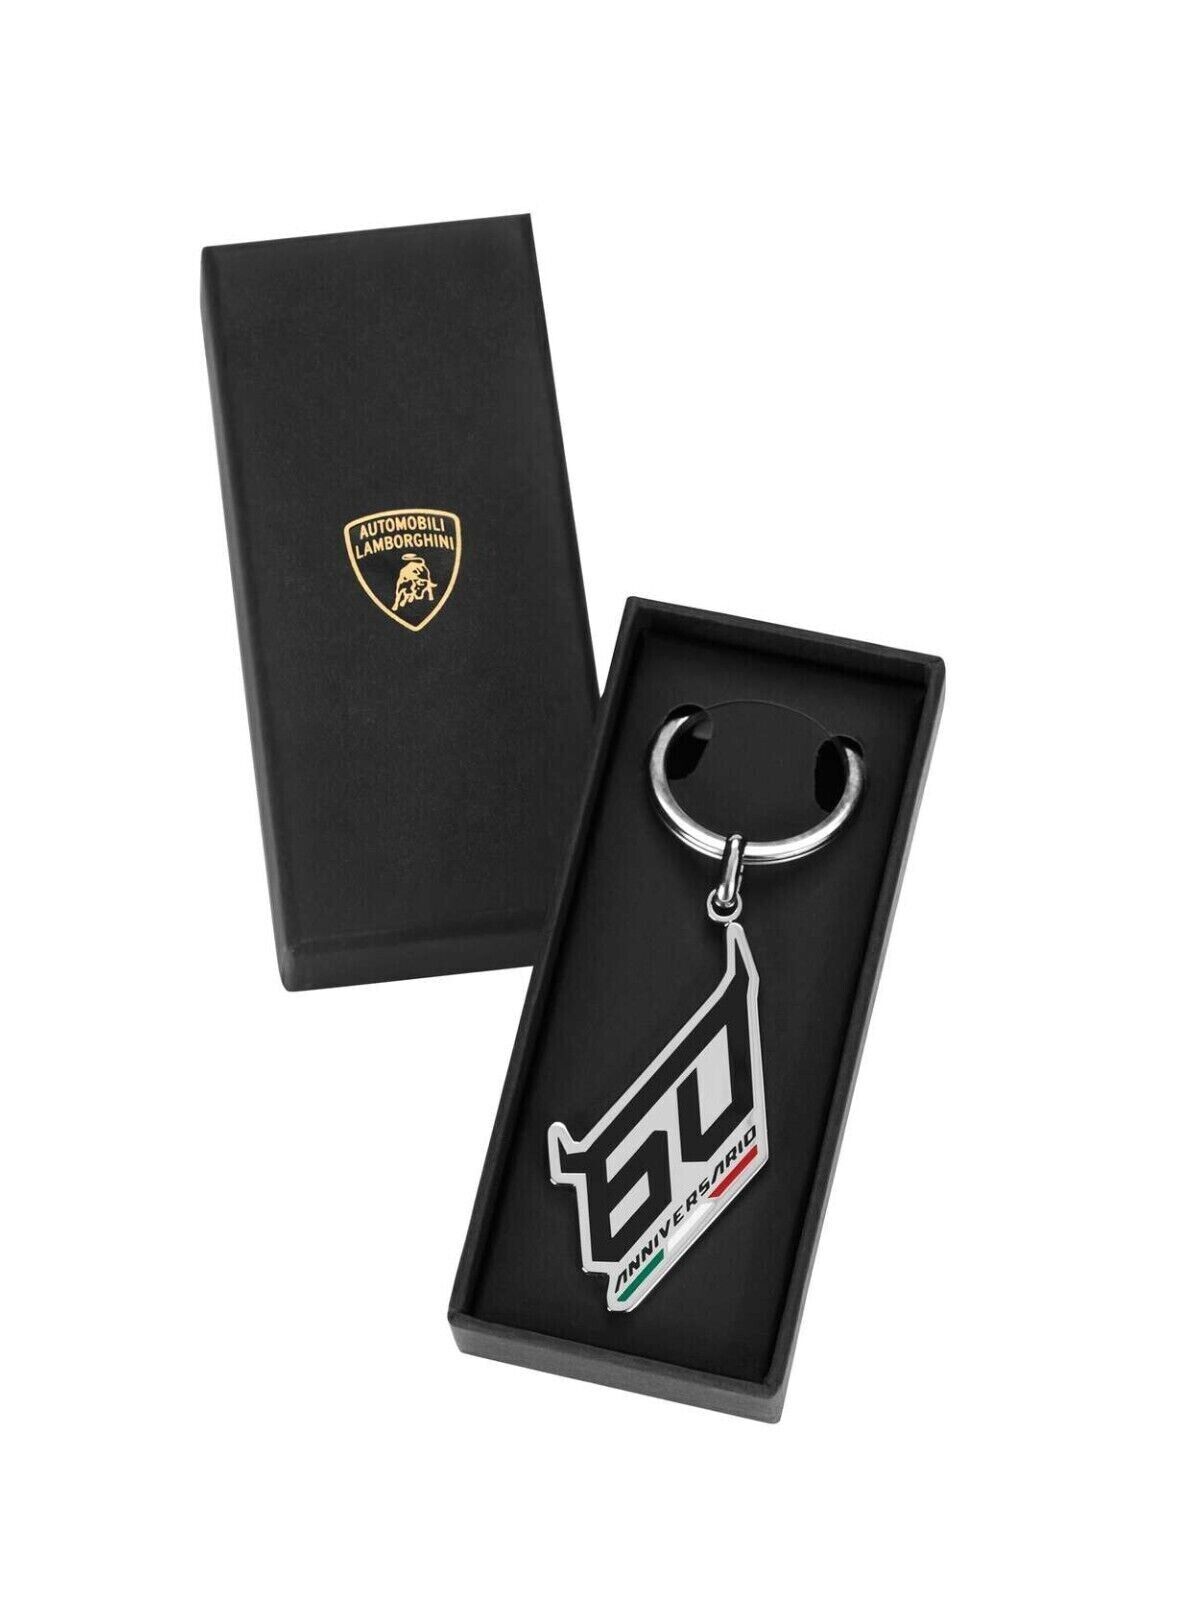 OFFICIAL Lamborghini 60th Anniversary Special Edition Keyring